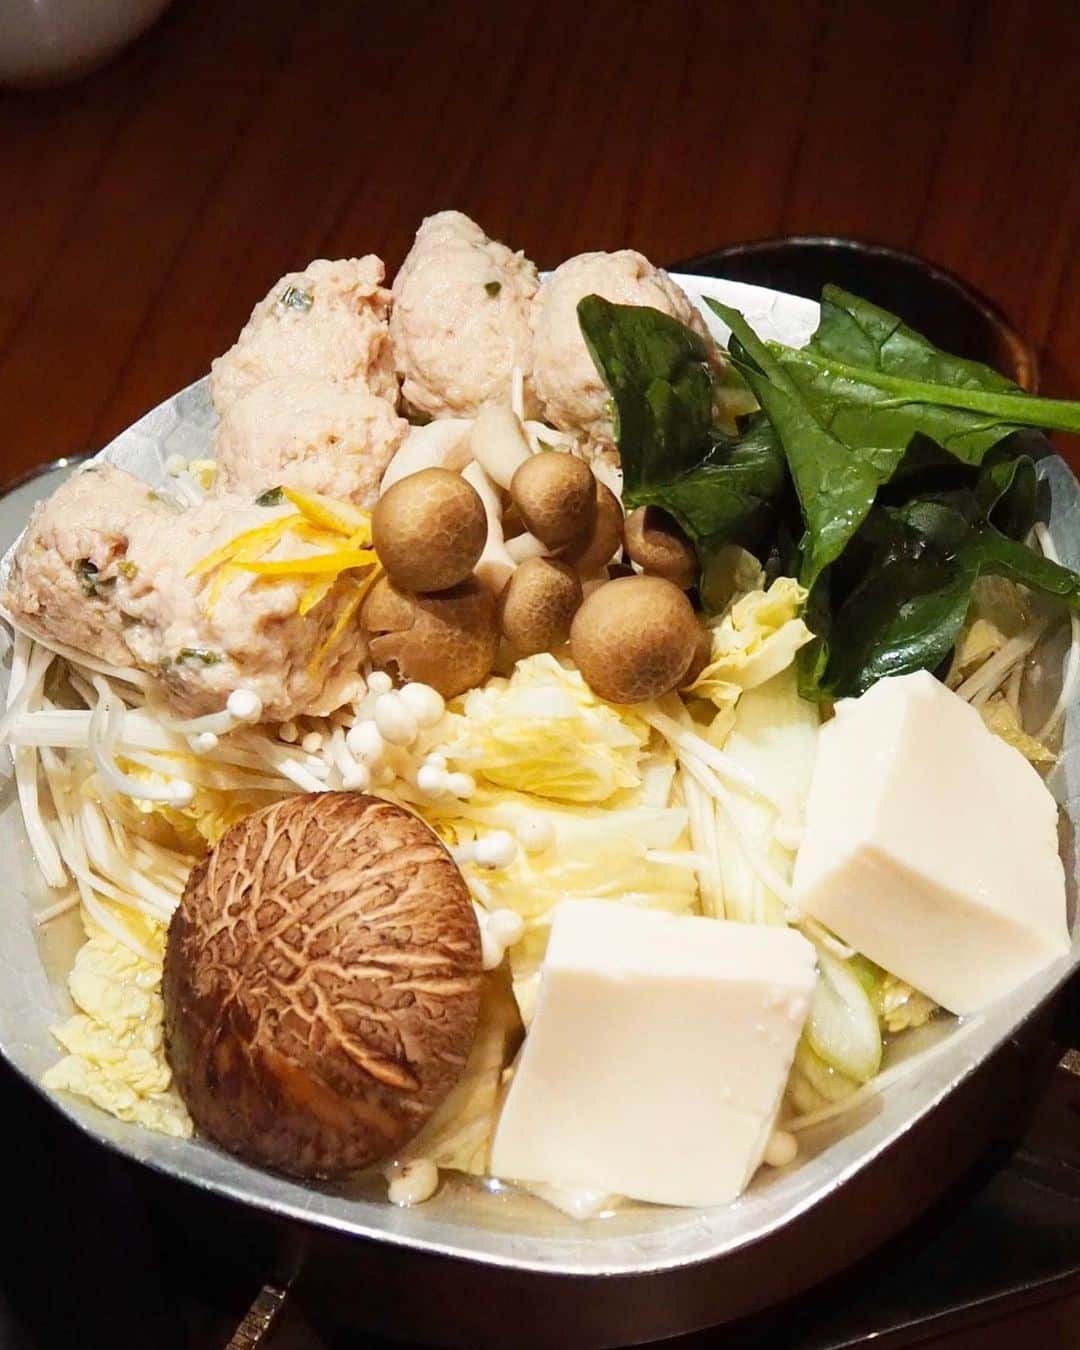 Li Tian の雑貨屋さんのインスタグラム写真 - (Li Tian の雑貨屋Instagram)「{Taste of Kochi} @sunwithmoonsg launches its latest regional specialty menu featuring ingredients from Kochi prefecture(高知県). Think eggplant, chives, ginger flower, sweet shishito pepper, Yuzu and Arus Melon 🍋 🍈 🍆   The dishes I’ve tried are:  1. Yuzu Hotpot with handmade chicken meatballs, tofu and mushrooms ($15.80) — Though we could hardly taste the Yuzu, the broth was clean and tasty. Meatballs were fresh and differed from the usual springy or dense texture.   2. Ebi and Hotate Kama Shiromiso Gratin ($10.80) — like a Japanese-western fusion baked gratin in a Yuzu fruit   3. Gyu Avocado Salad Donburi ($17.80) — the highlight is the tangy ginger flower sauce when you mixed it together with fluffy grains and beef.   4. Nasu Yuzu miso ($9.80) - 🍋 grilled eggplant, shrimps and mushroom bits with Yuzu miso has a heavy taste due to the miso with hints of sweetness and citrus notes. Good to pair with rice   5. Arus Melon Parfait ($12.80) - 🍈 the best thing about this dessert are the sweet and juicy Arus Melons. Suggest u can save the calories from the ice cream and artificial tasting melon syrup by heading straight for the Arus Melon priced at $10   This regional menu is only available for a limited time till early Dec. Do catch them before they are gone!   • • • #sgeats #singapore #local #best #delicious #food #igsg #sgig #exploresingapore #eat #sgfoodies #gourmet #yummy #yum #sgfood #foodsg #burpple #beautifulcuisines #bonappetit #instagood  #eatlocal #japanese #delicious #sgrestaurant #seasonal #日本料理 #sgpromo #mediainvite」11月17日 15時25分 - dairyandcream